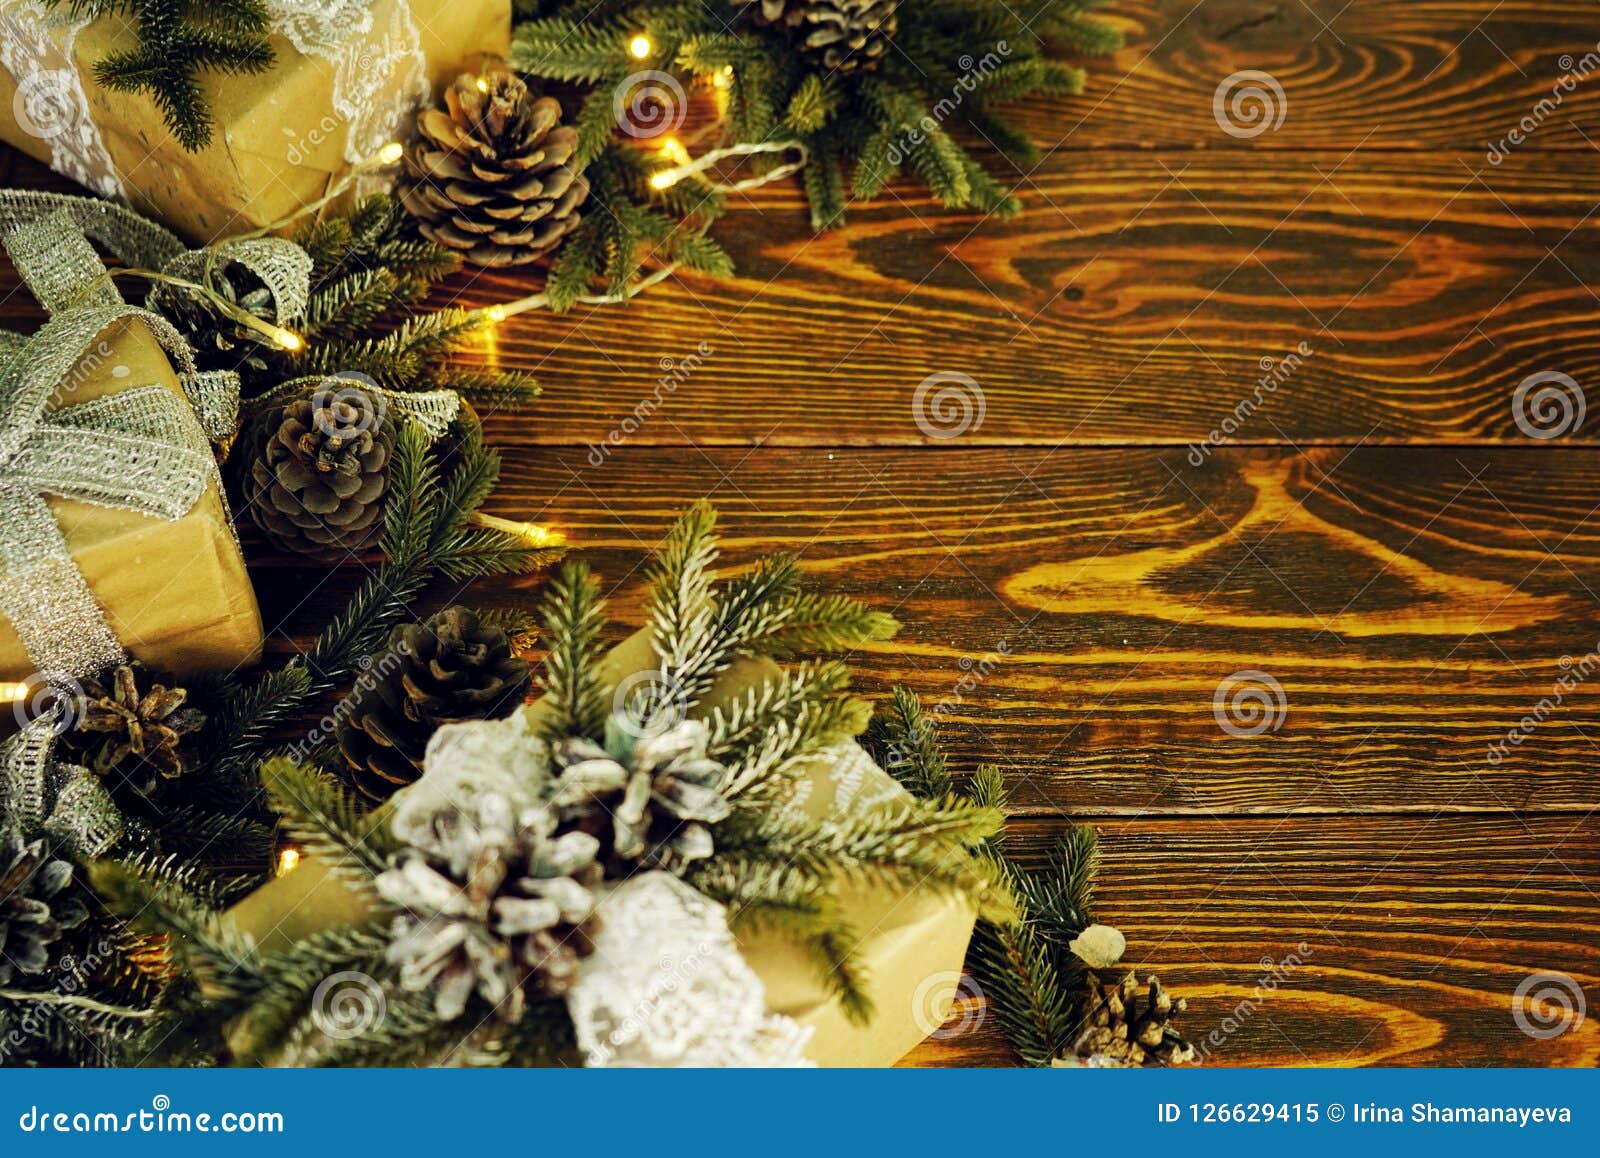 Rustic Styled New Year , Vintage Style Wooden Texture Background. Happy ...